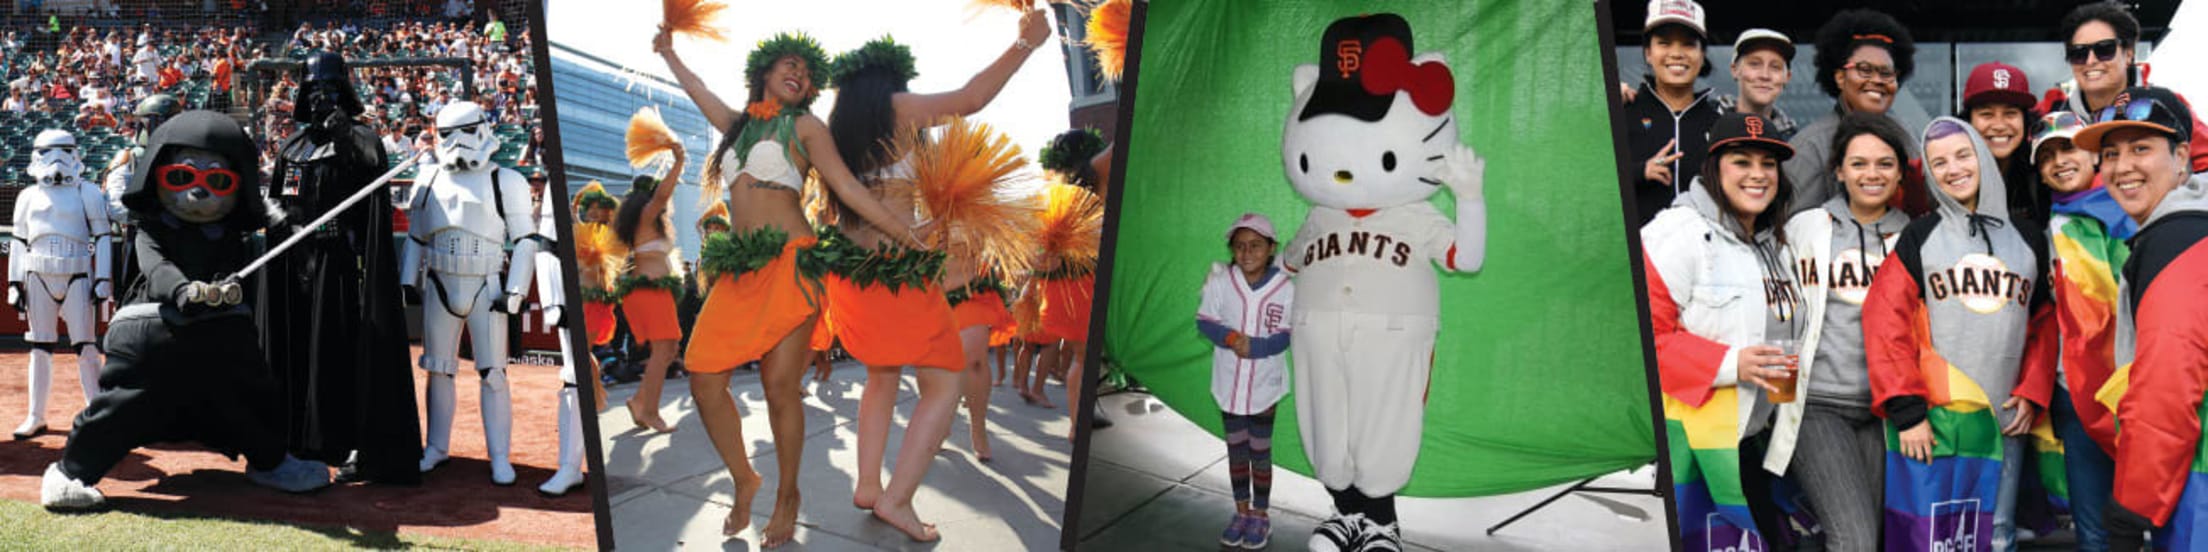 SFGiants on X: In honor of Fiesta Gigantes, the #SFGiants will wear  Gigantes jerseys for today's game. Throughout the game, the Giants will  celebrate Hispanic culture and elevate the work of local